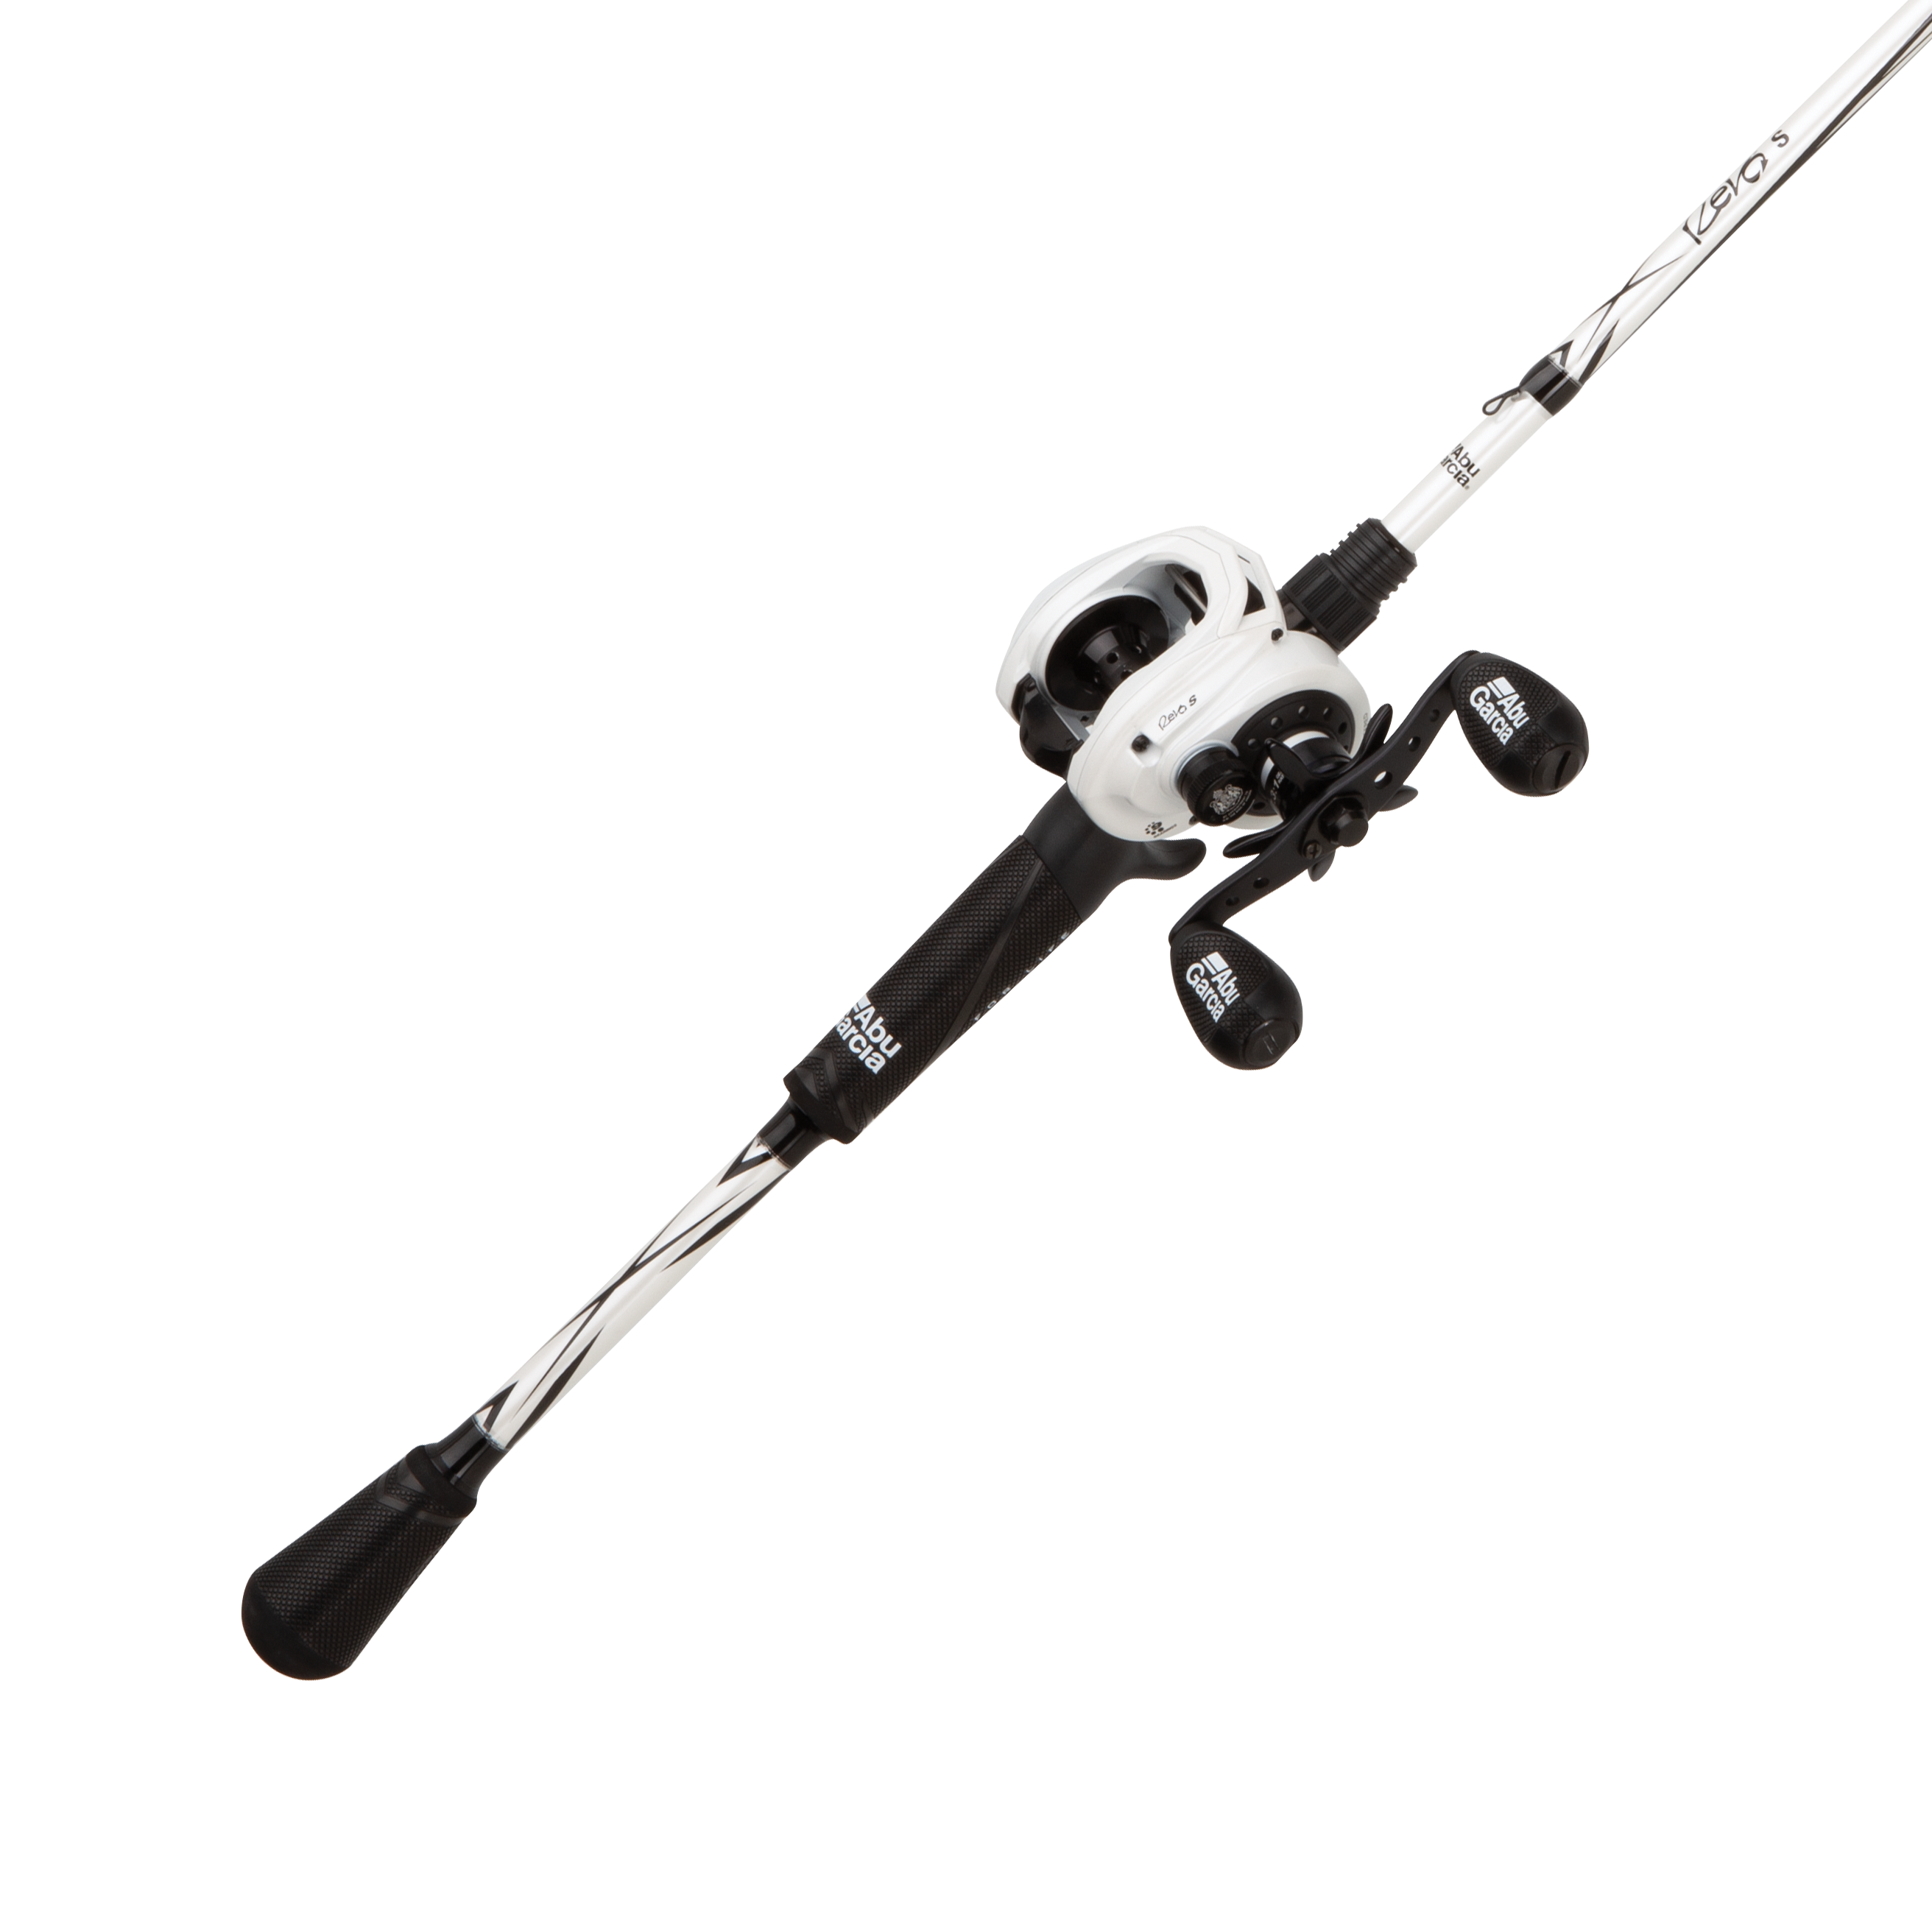 Baitcaster Fishing Rod and Reel Combo Right Hand High Speed Reel 2 Piece